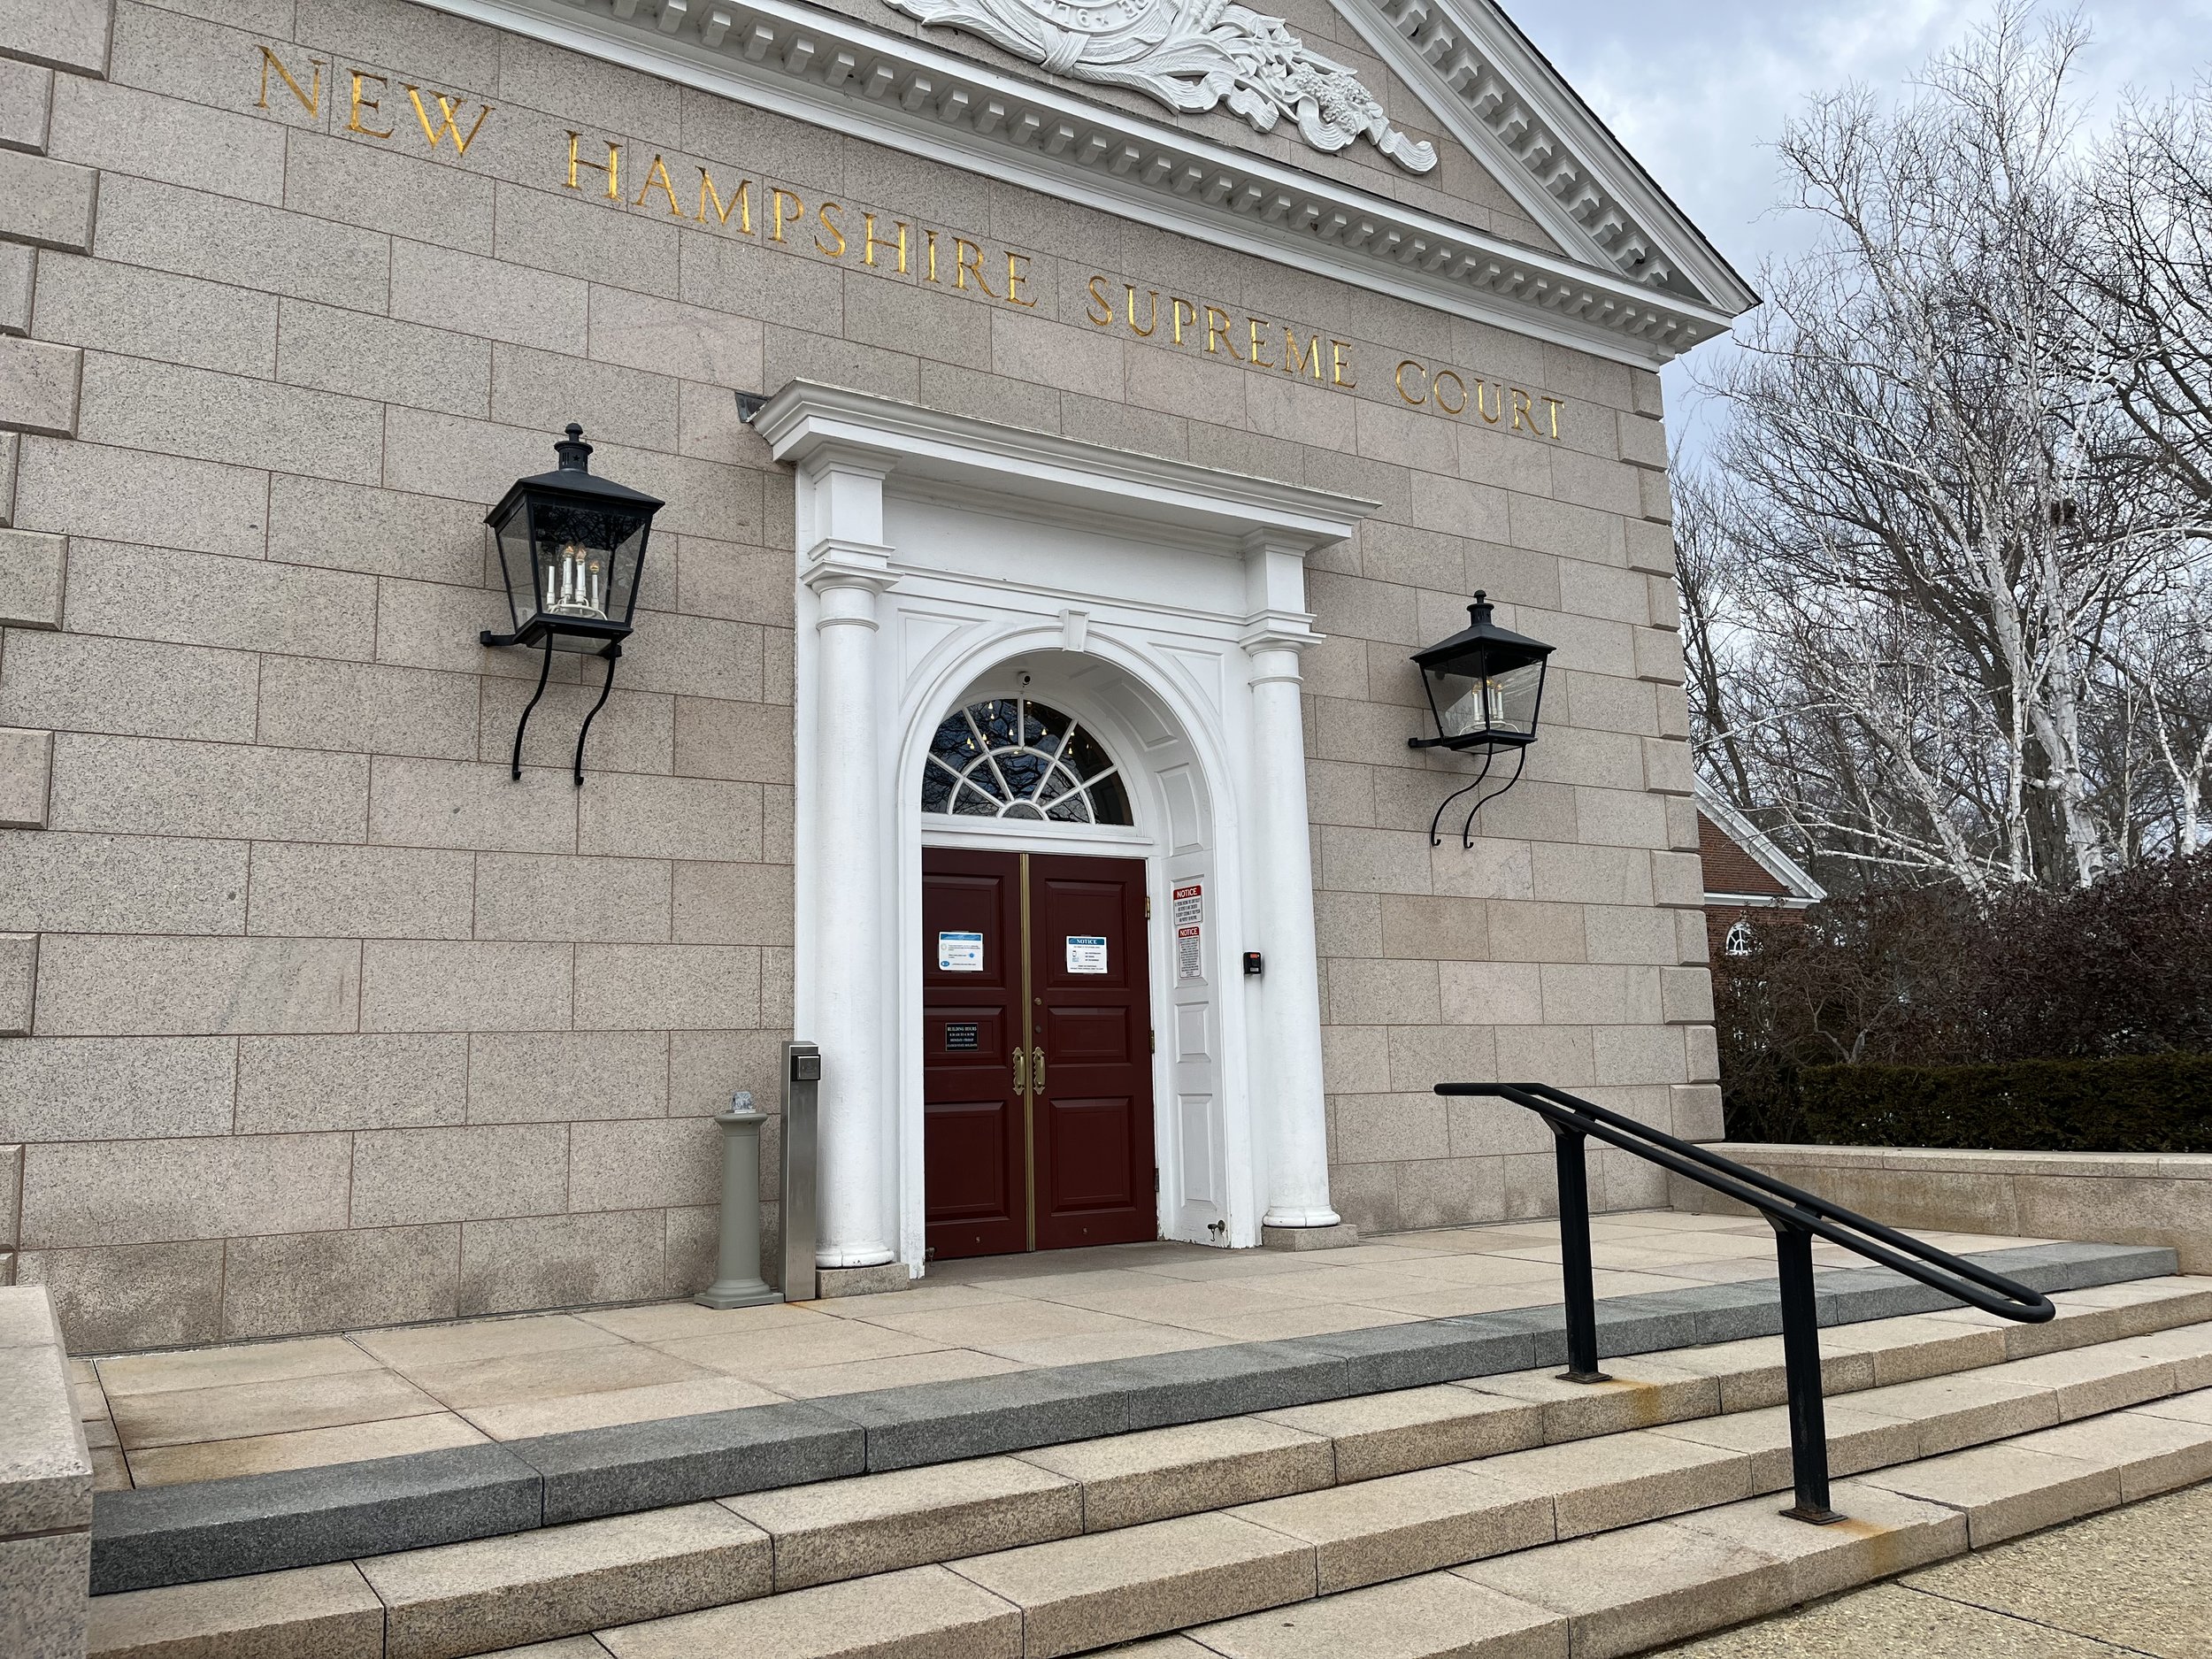  NH Supreme Court Building, credit Paul Cuno-Booth for The Granite State News Collaborative 